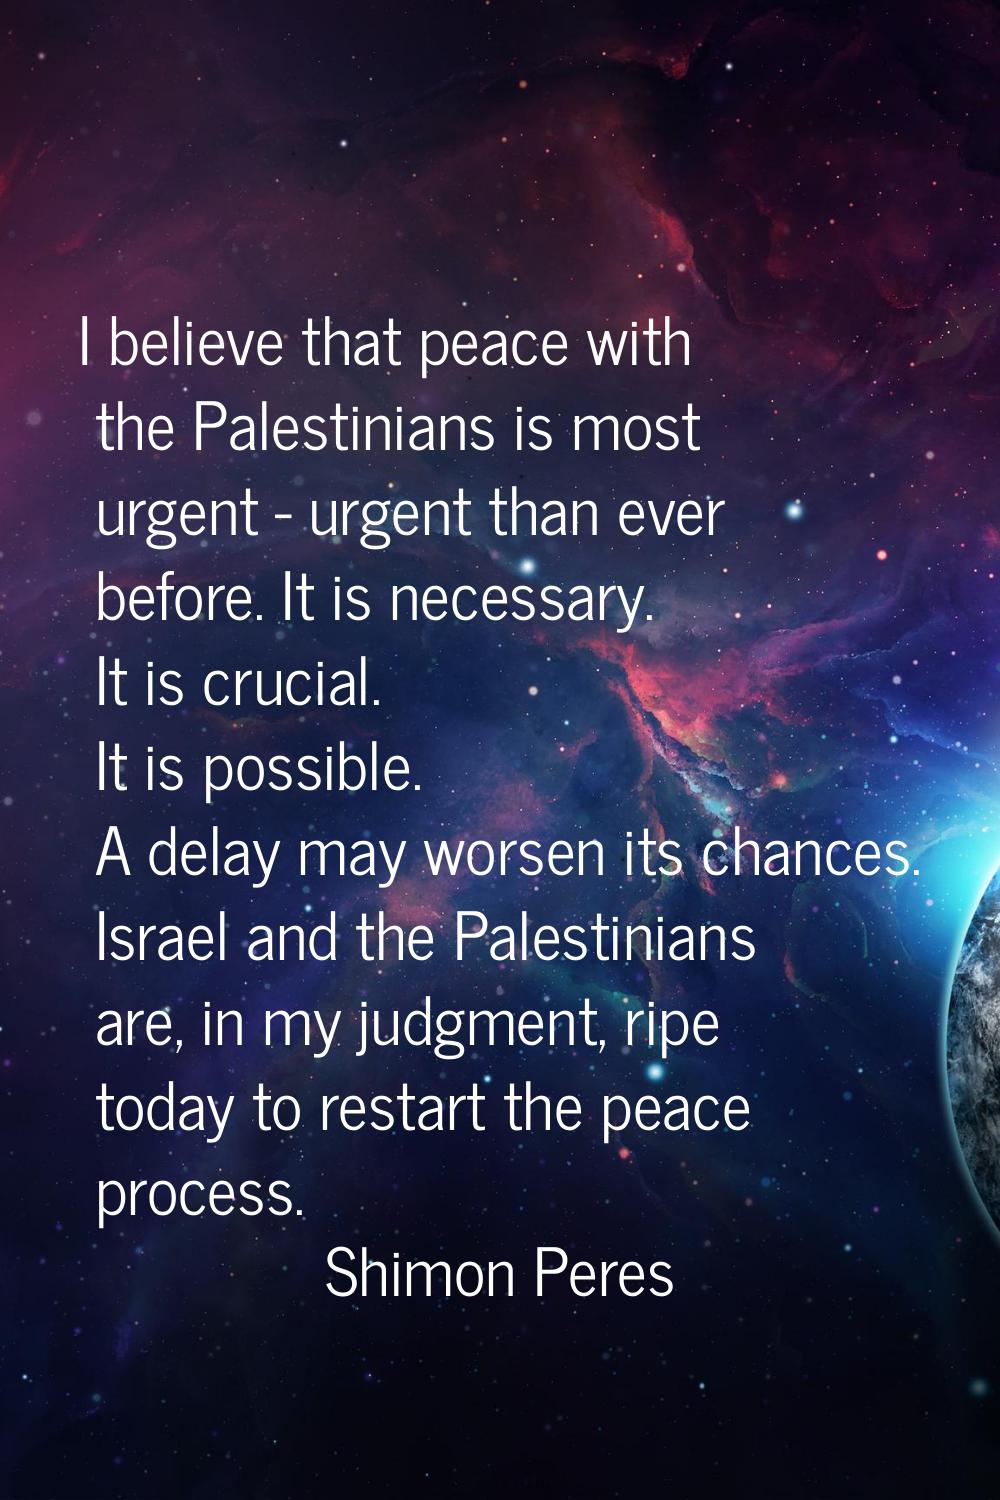 I believe that peace with the Palestinians is most urgent - urgent than ever before. It is necessar